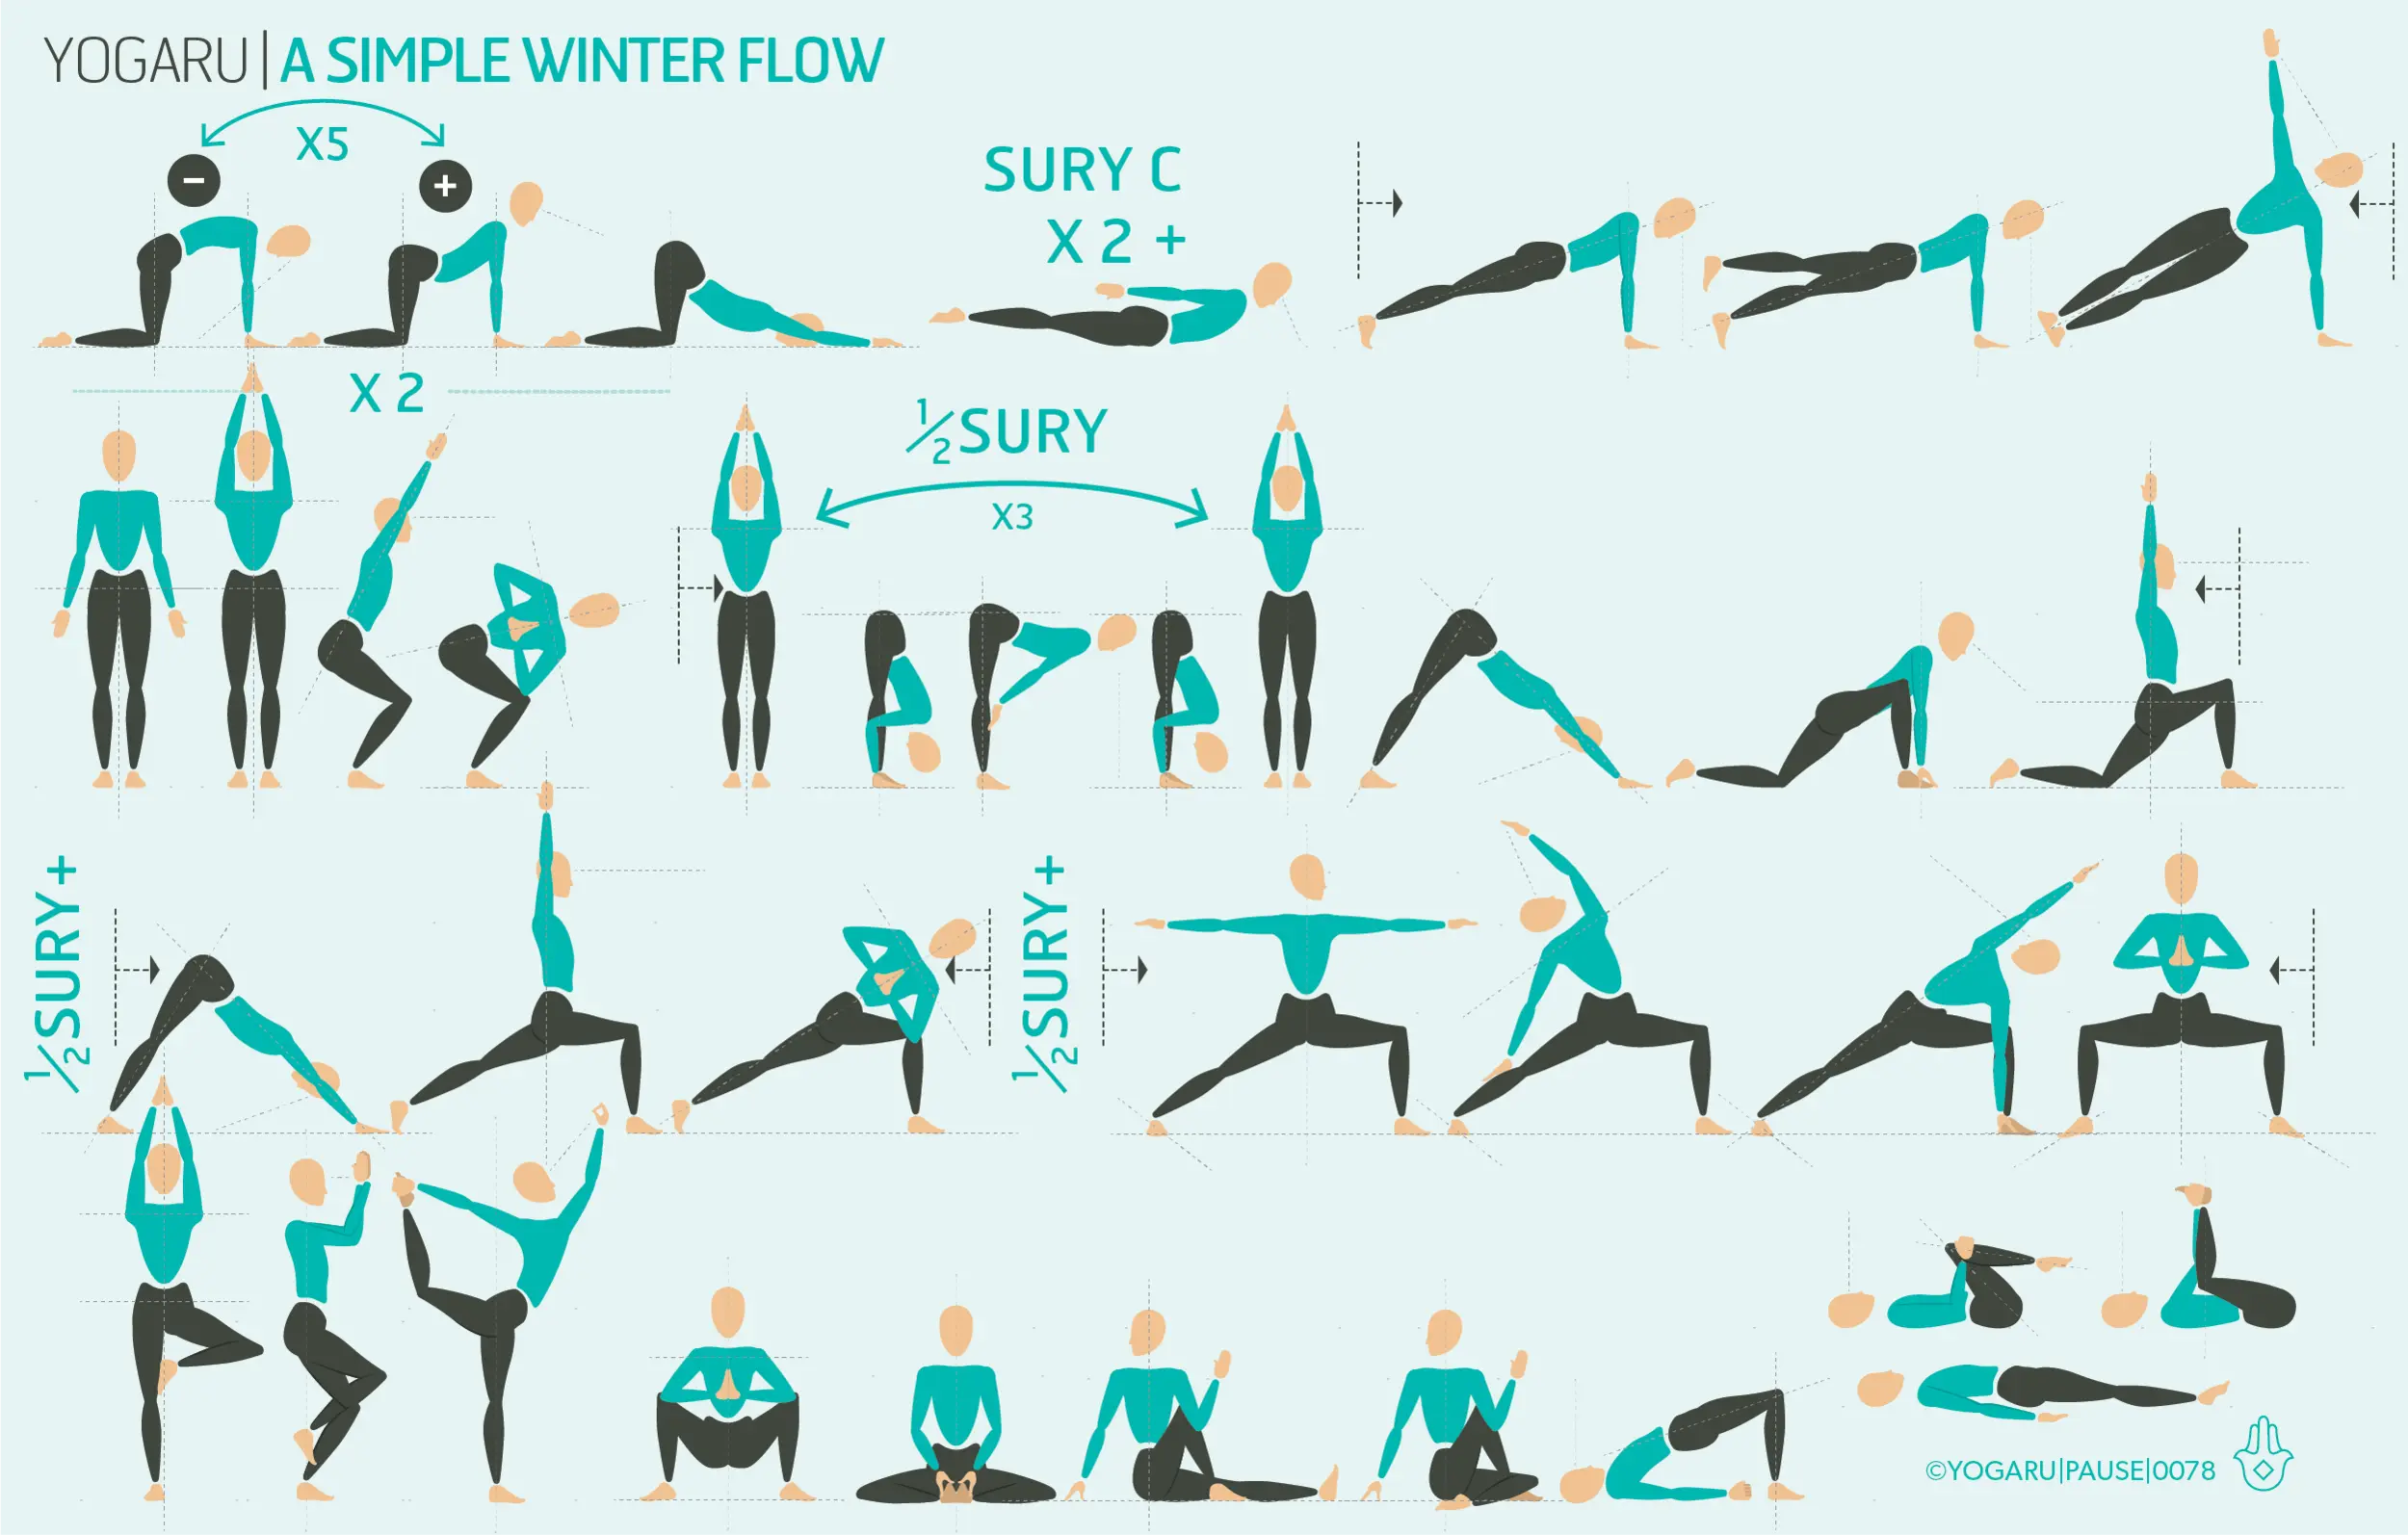 vinyasa flow yoga routine - What is the basic flow sequence for vinyasa